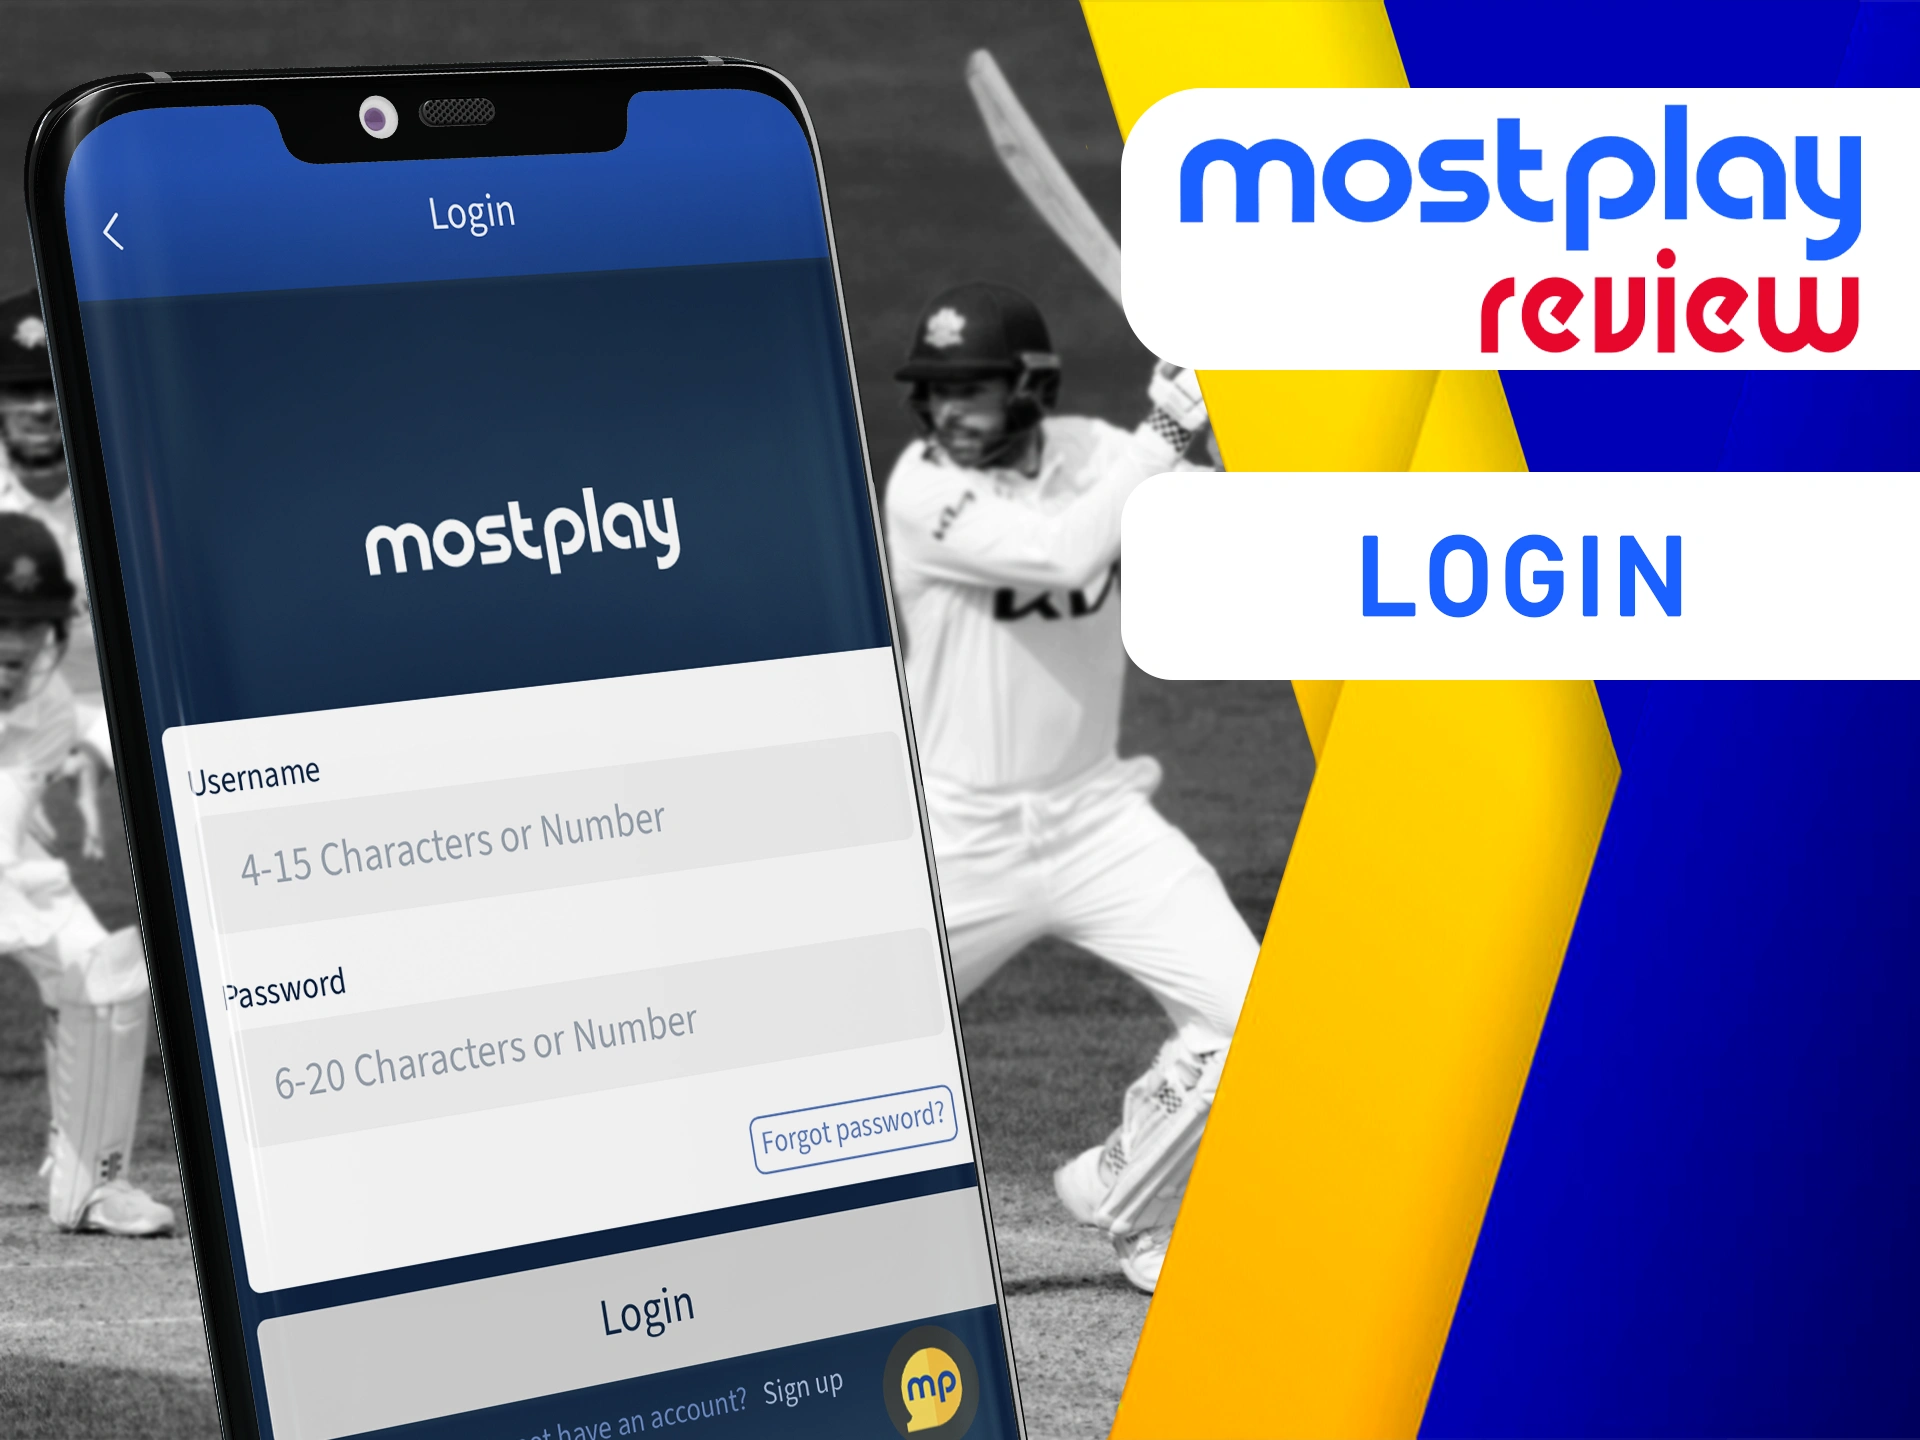 Log in to your personal account through the Mostplay app.